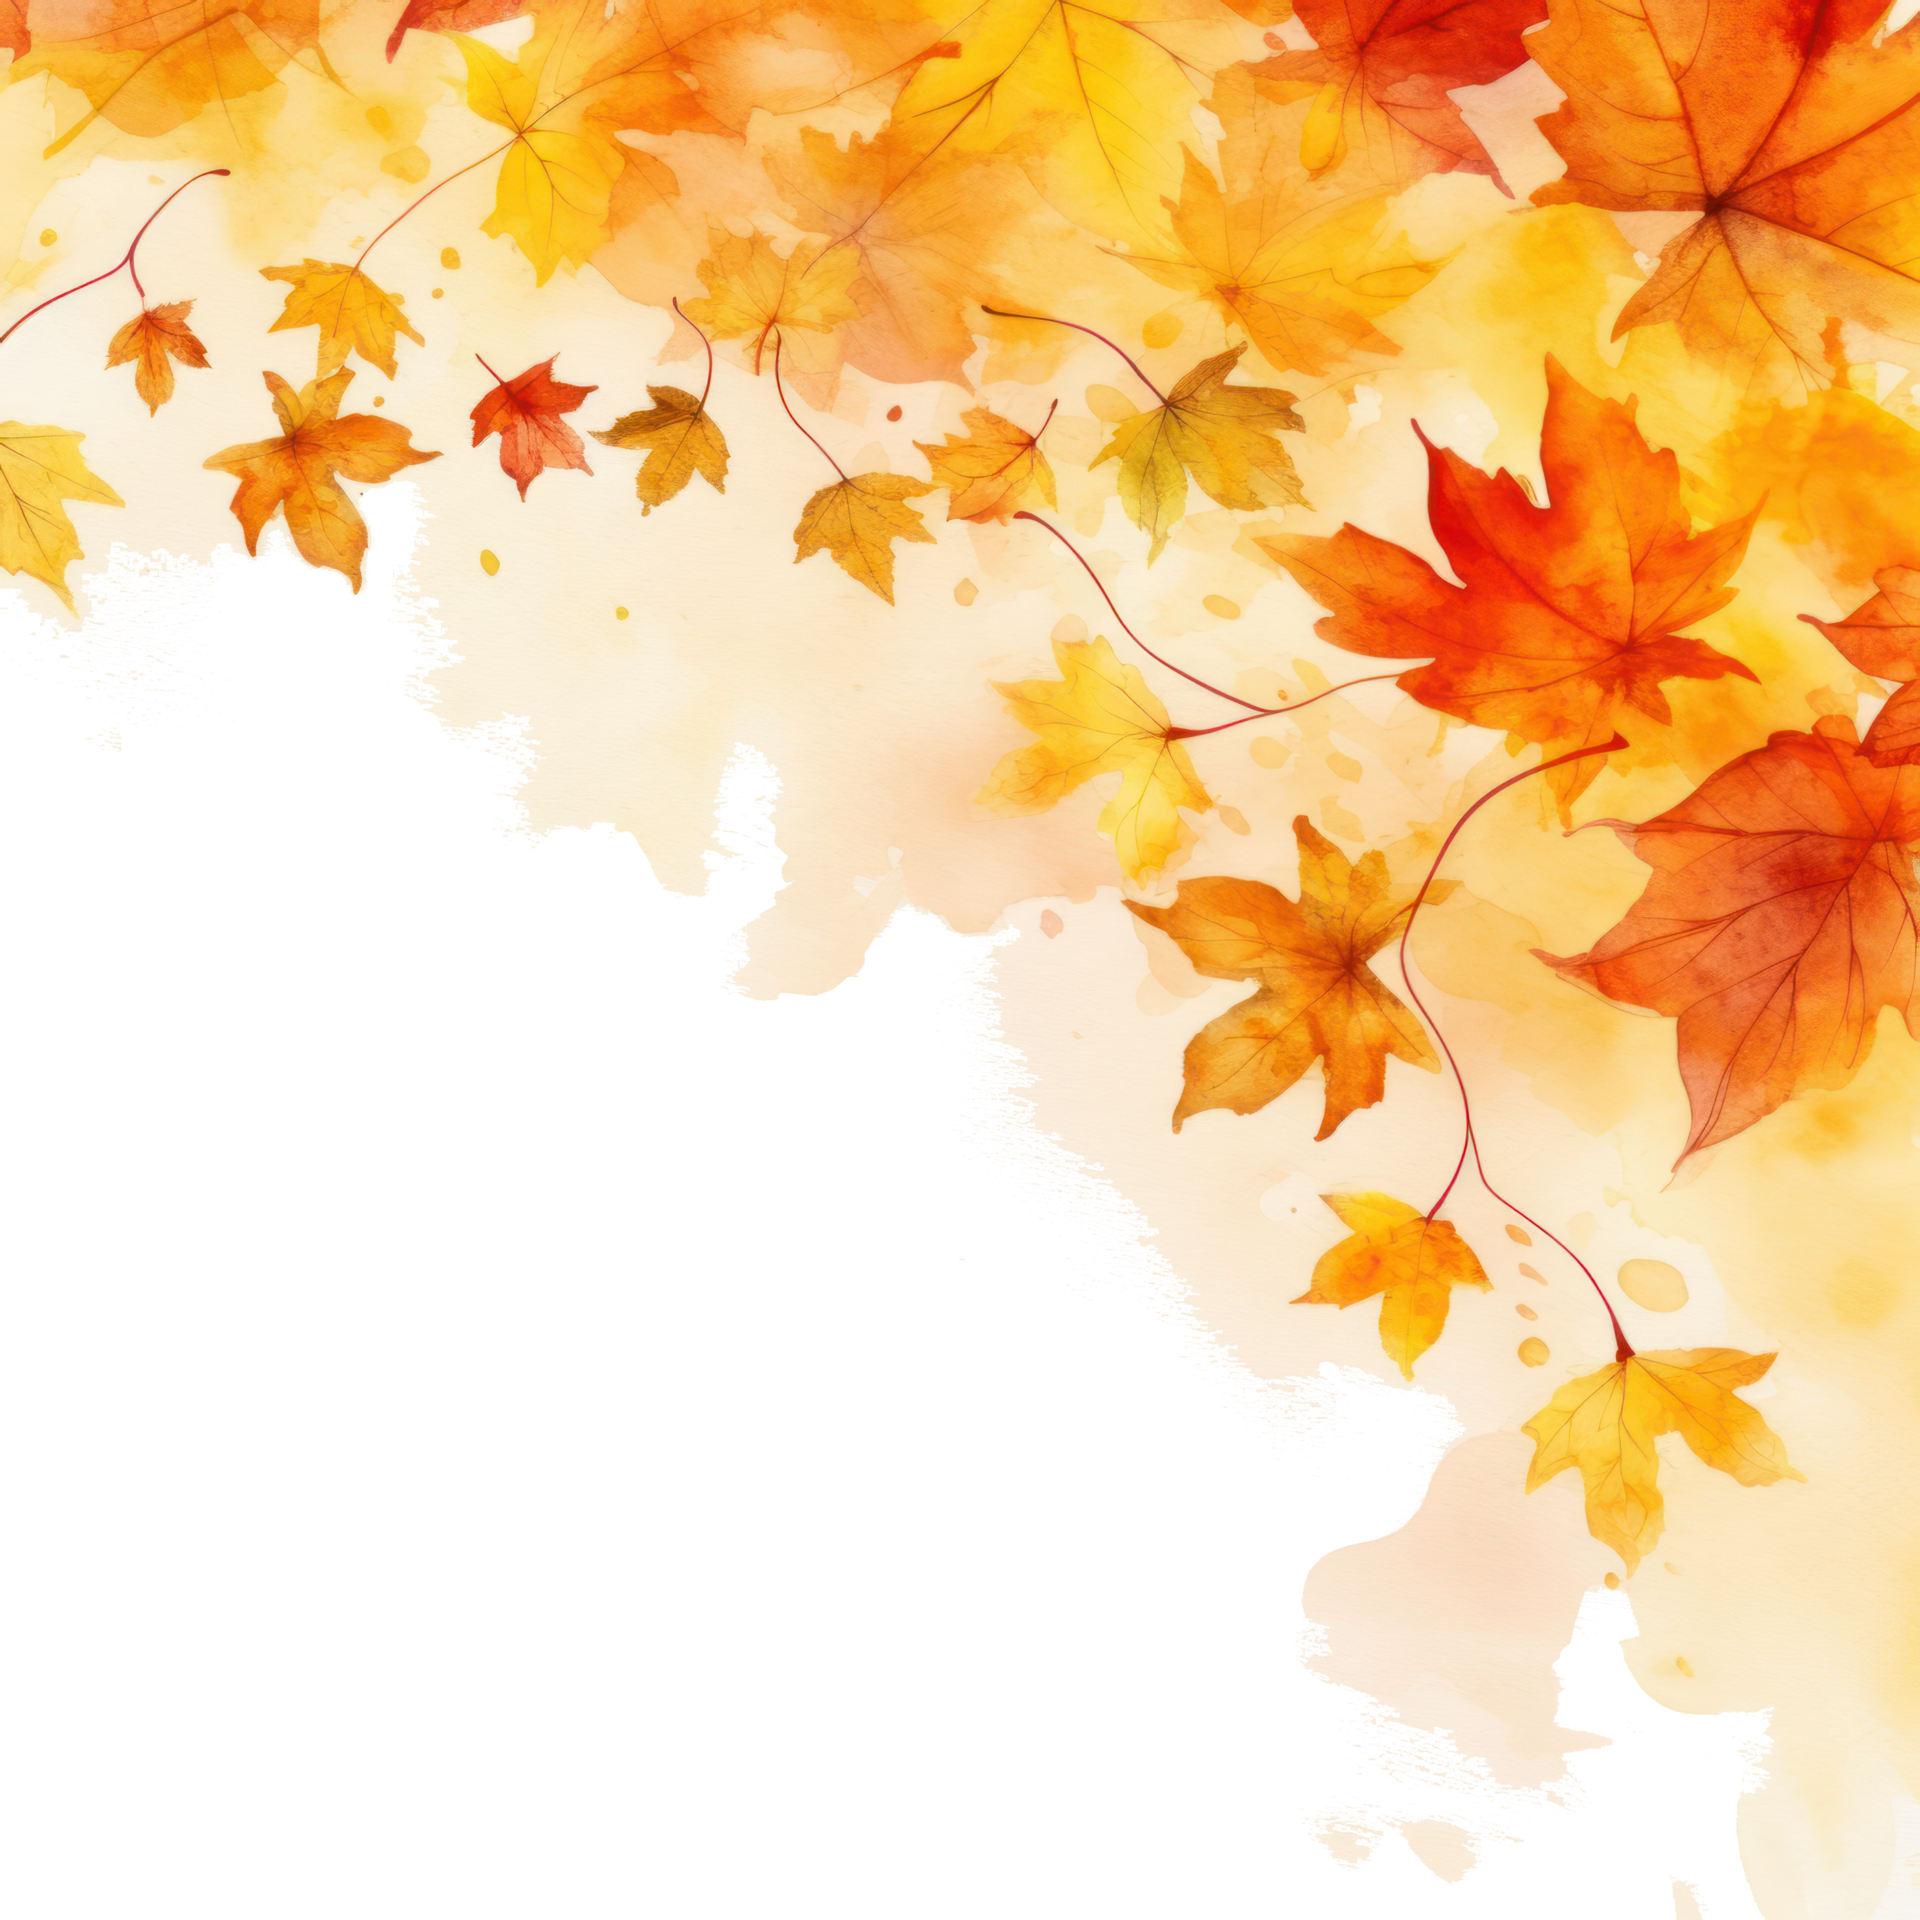 Autumn Maple Leaves PNG Images & PSDs for Download